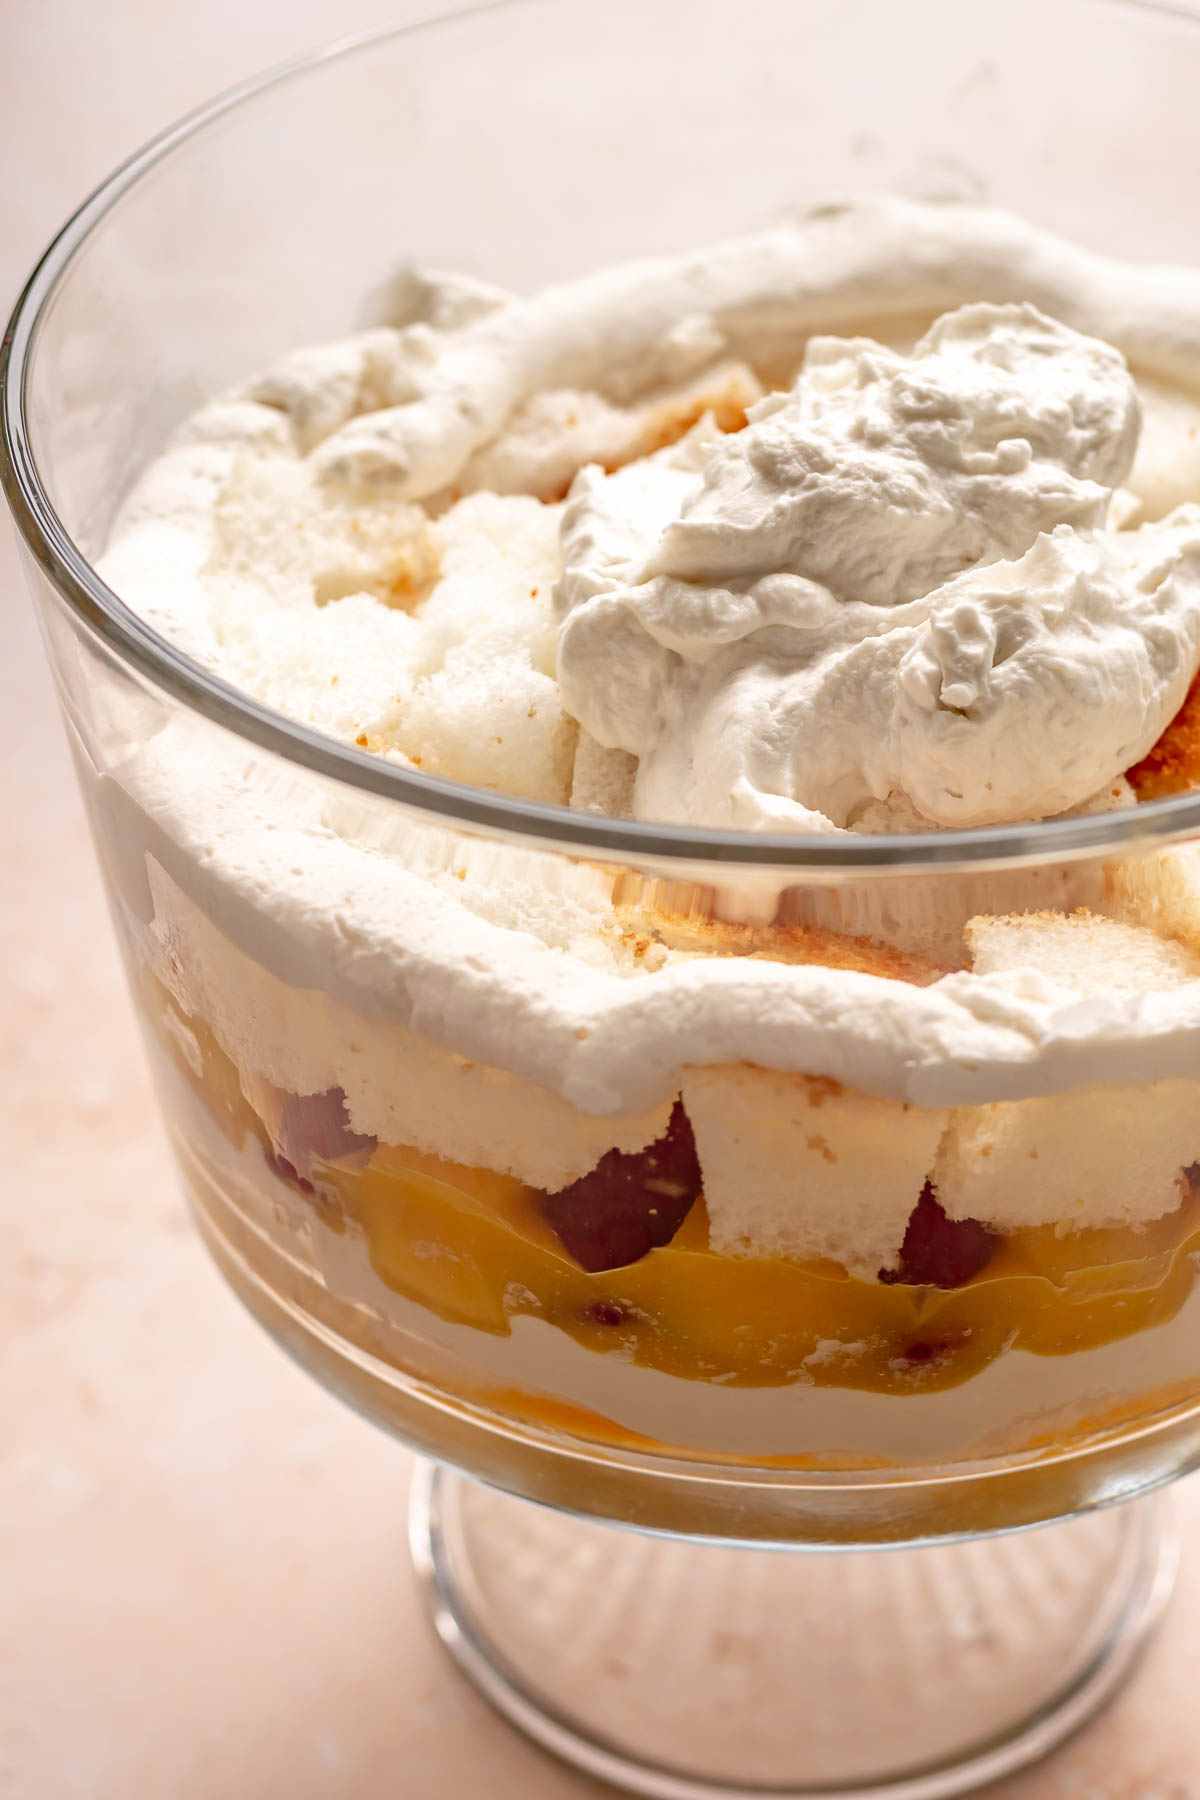 Whipped cream dollop on top of fruit in a trifle bowl.